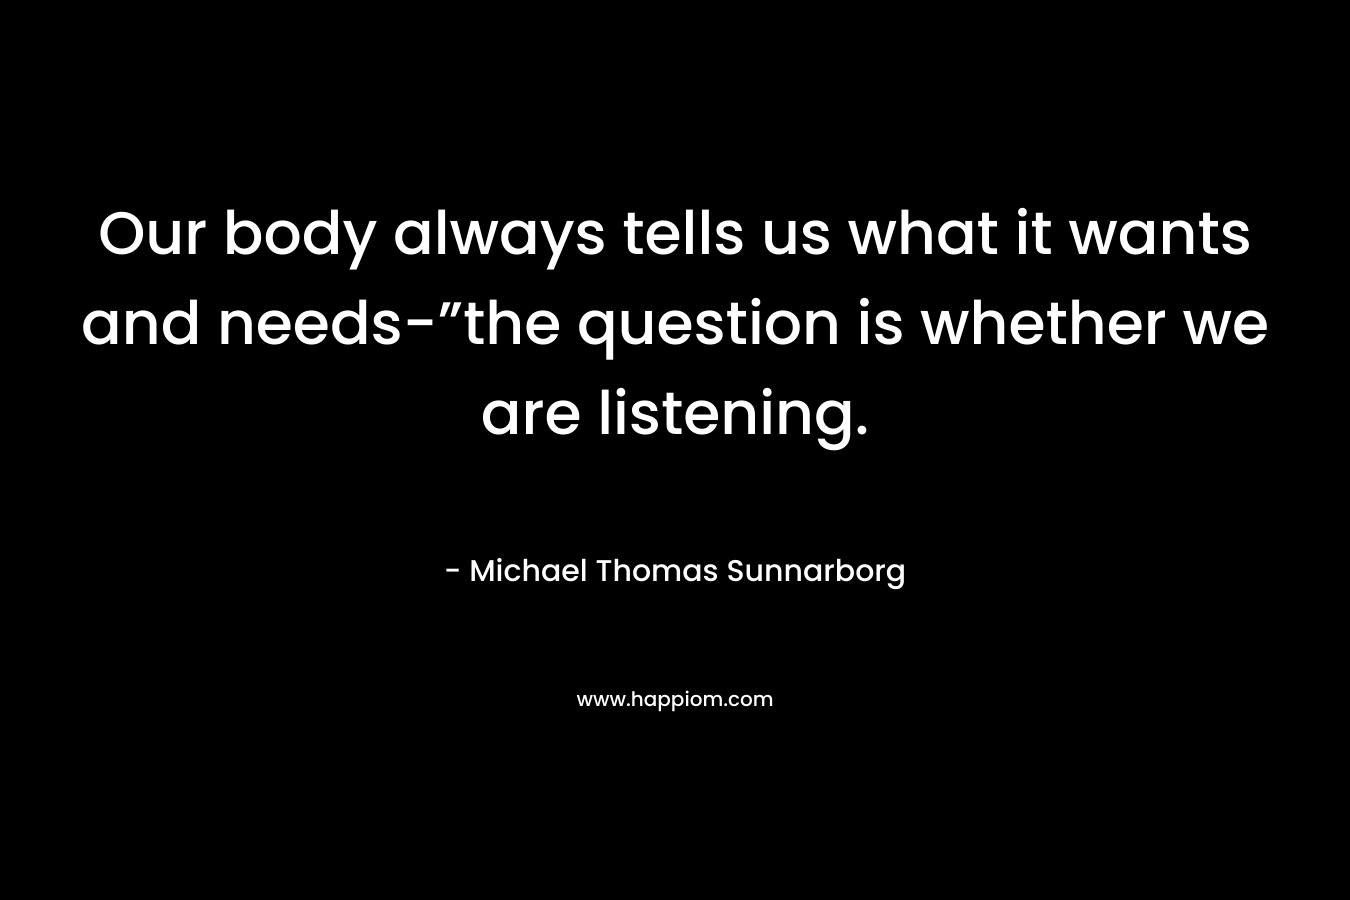 Our body always tells us what it wants and needs-”the question is whether we are listening. – Michael Thomas Sunnarborg